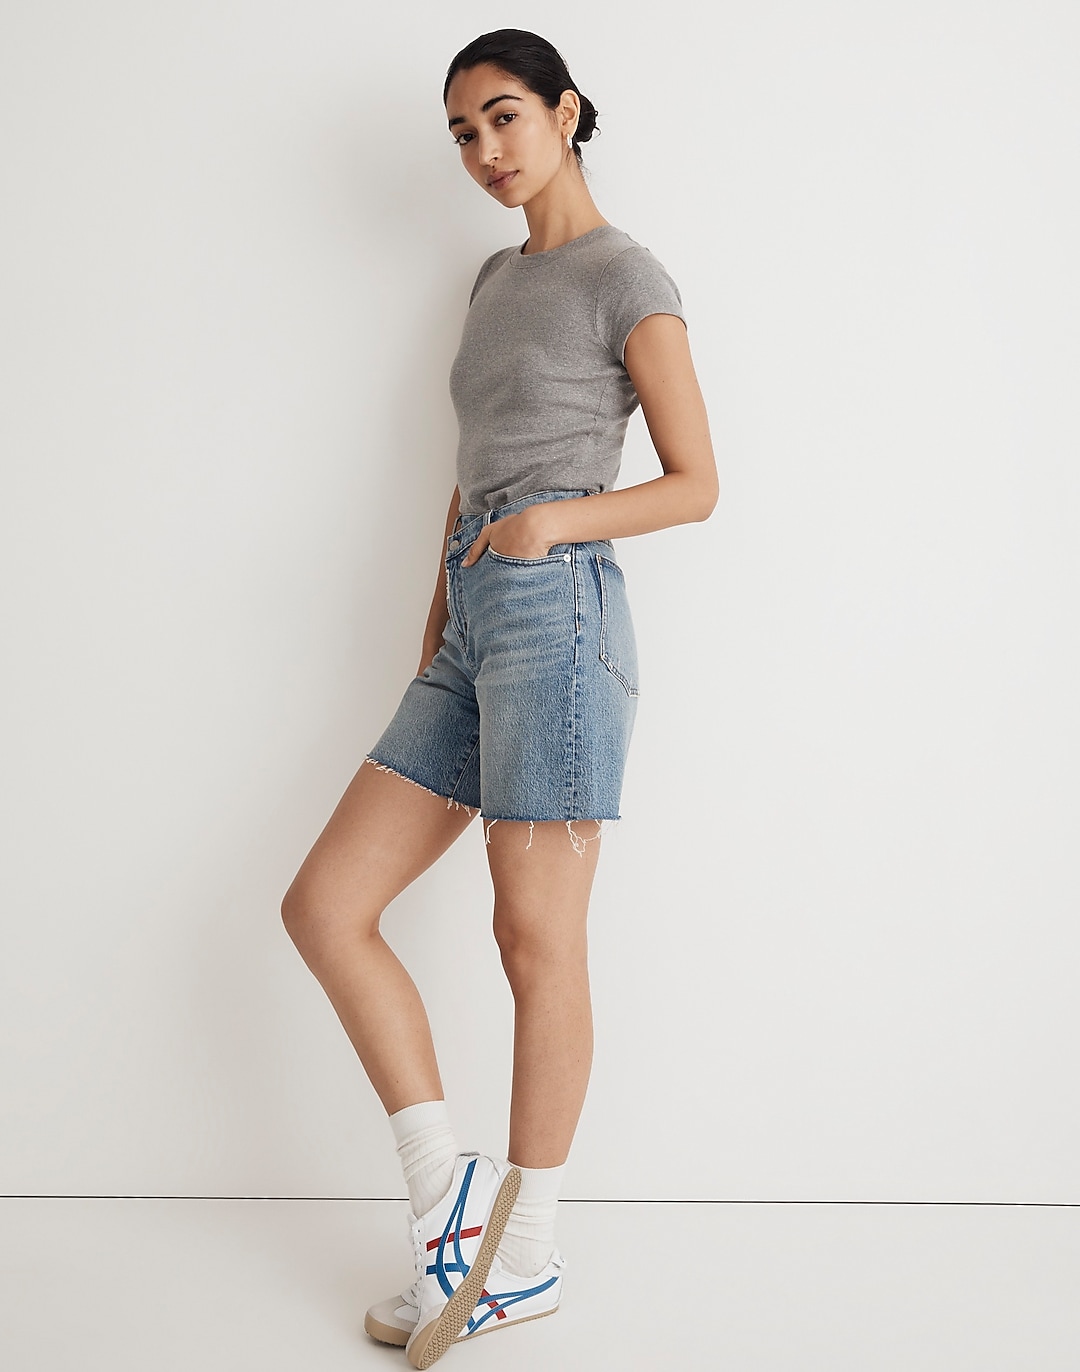 Madewell x Molly Dickson Crossover Baggy Jean Shorts | Madewell